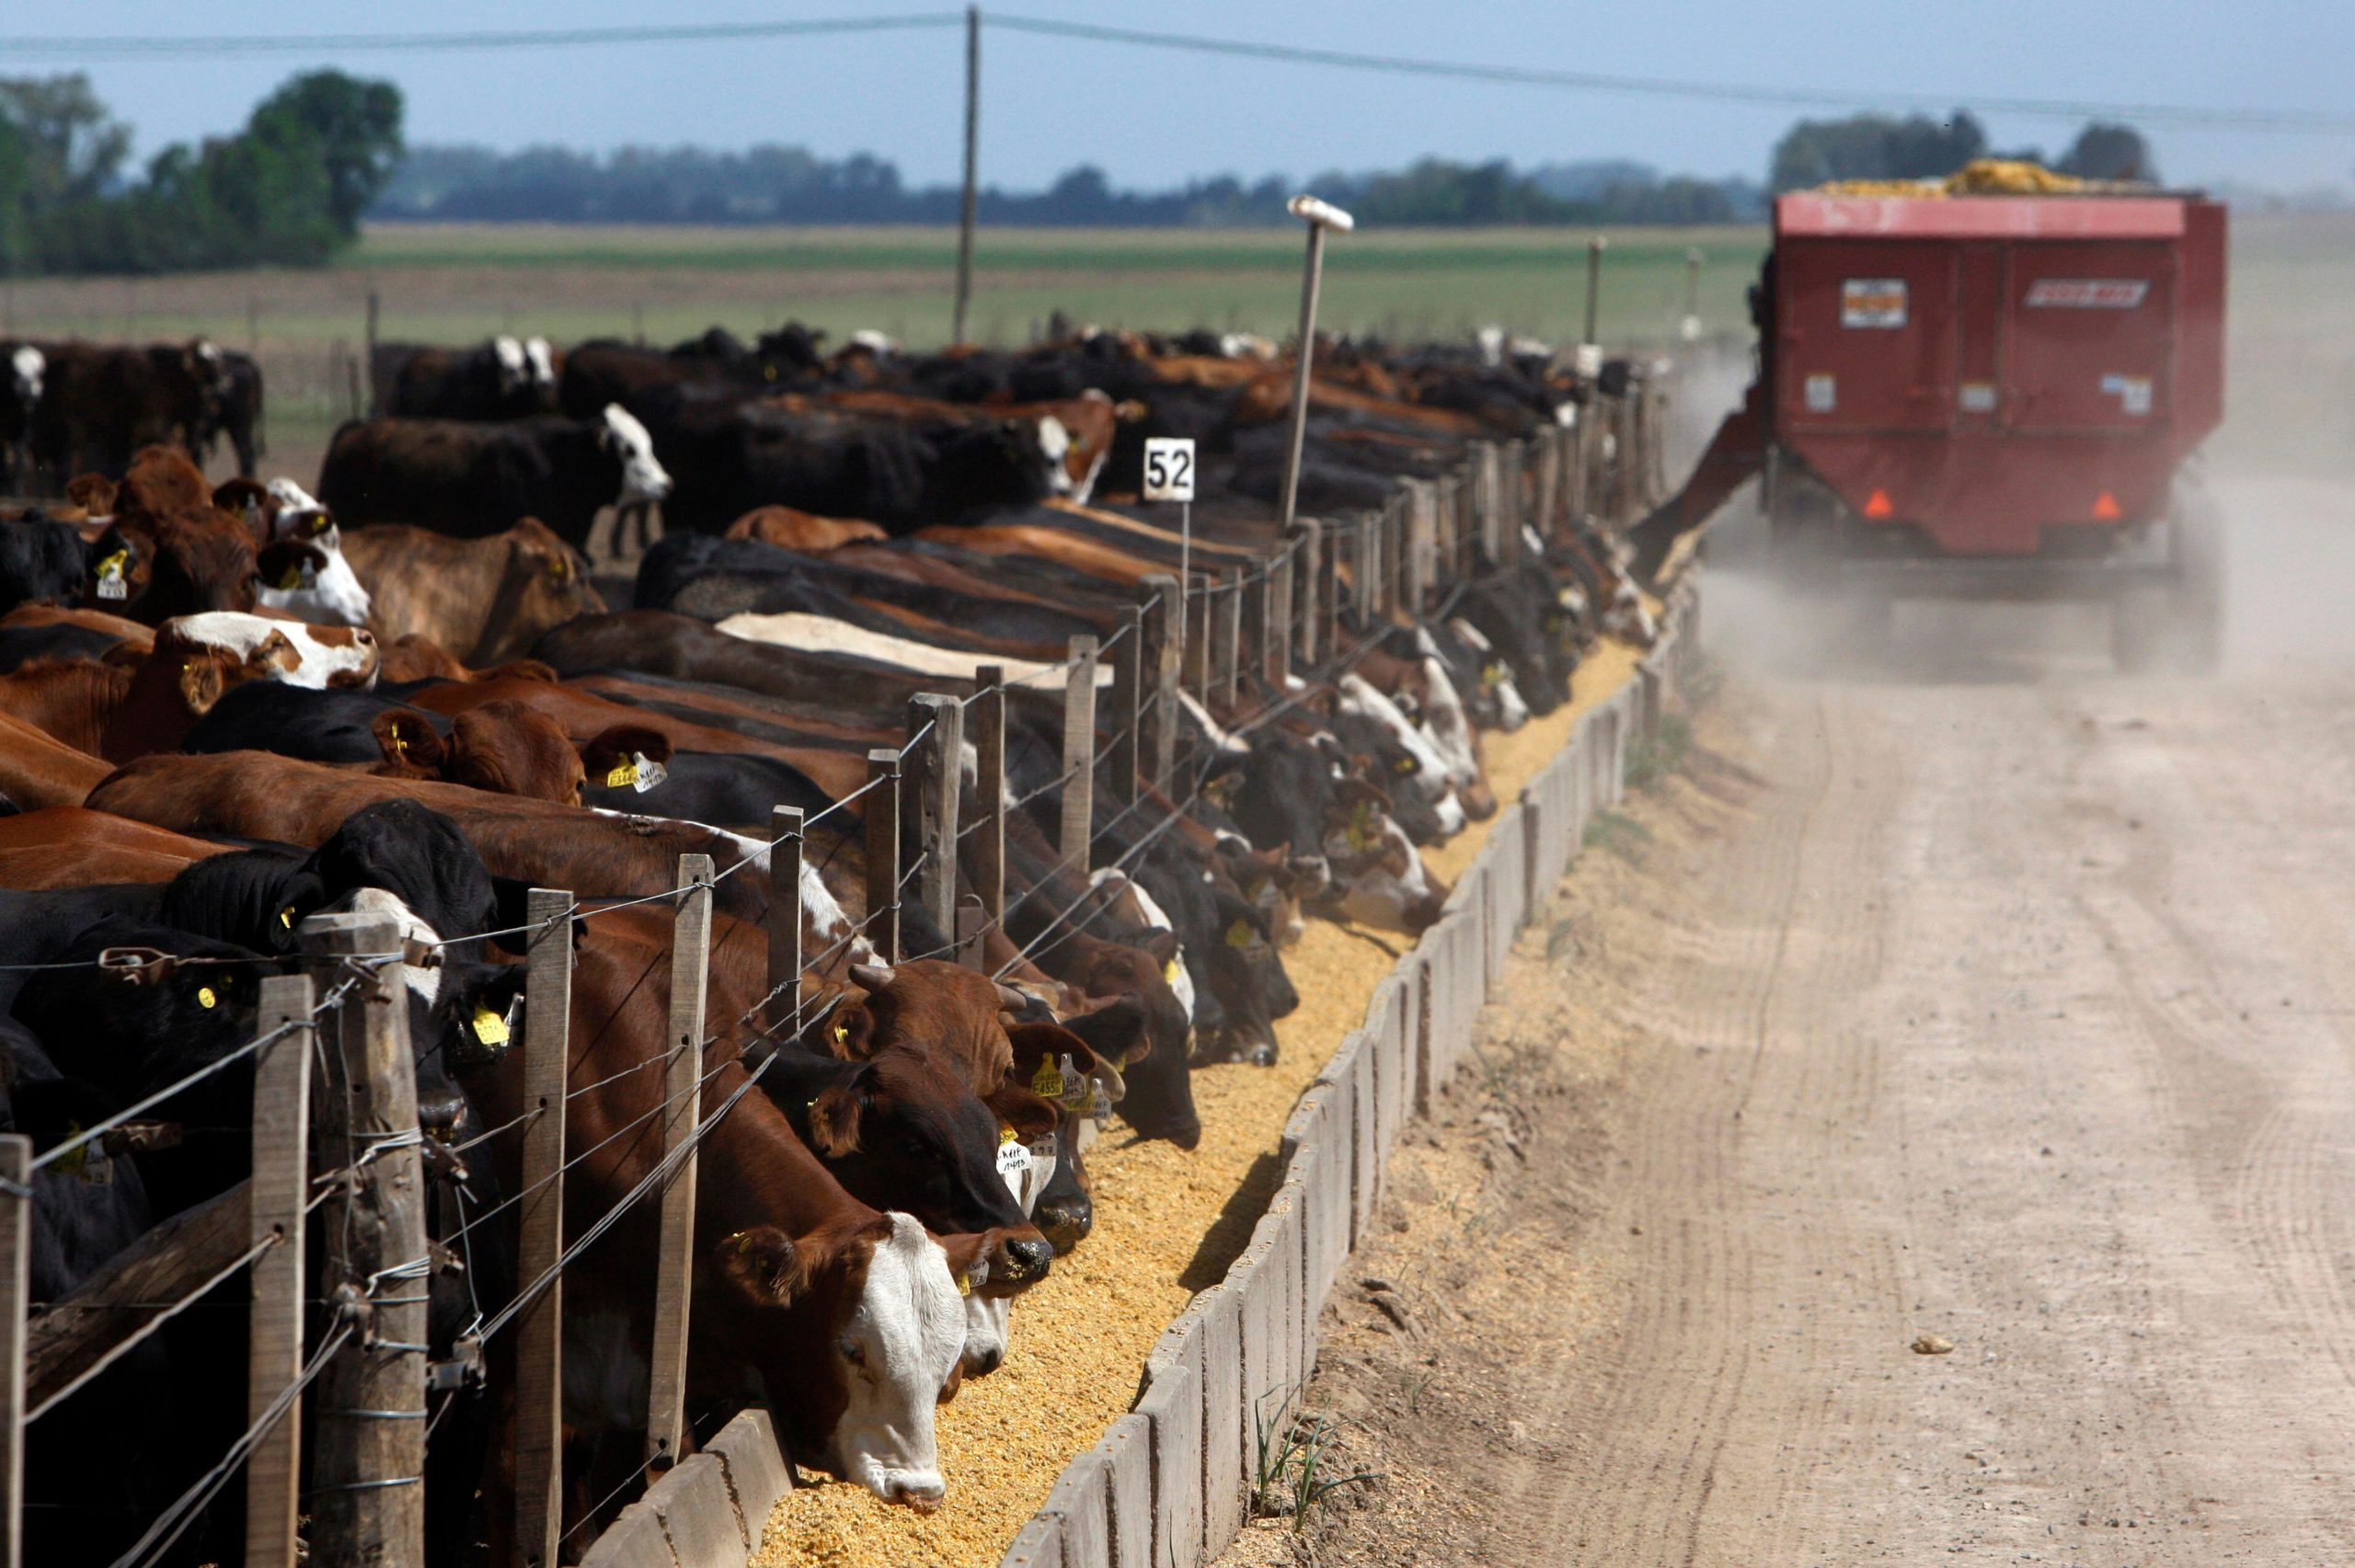 Beef cattle at an industrial-scale feedlot in Argentina. Despite growing recognition of the industry's environmental impact, livestock sector emissions remain a delicate issue in public and high-level discussions. (Image: Marcos Brindicci / Alamy)